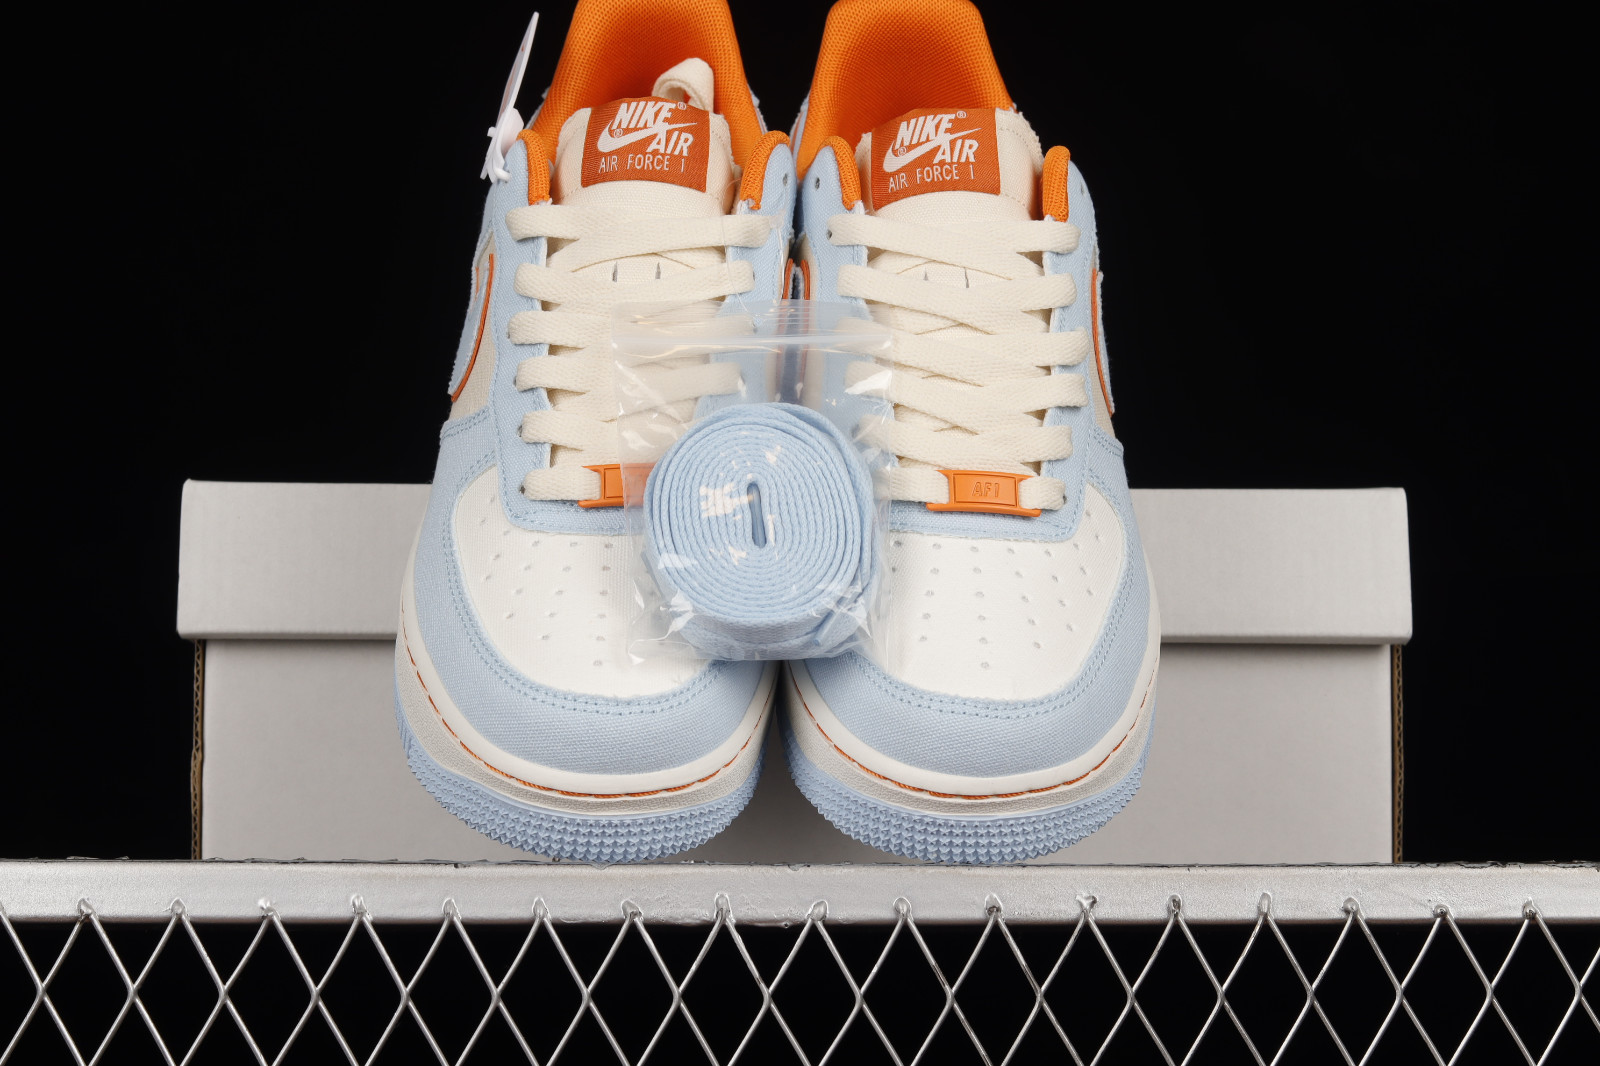 Inactivo Christchurch Experto Nike obra Air Force 1 07 Low Orange Light Blue White 315122 - GmarShops -  cool grey lebron 9s - 662